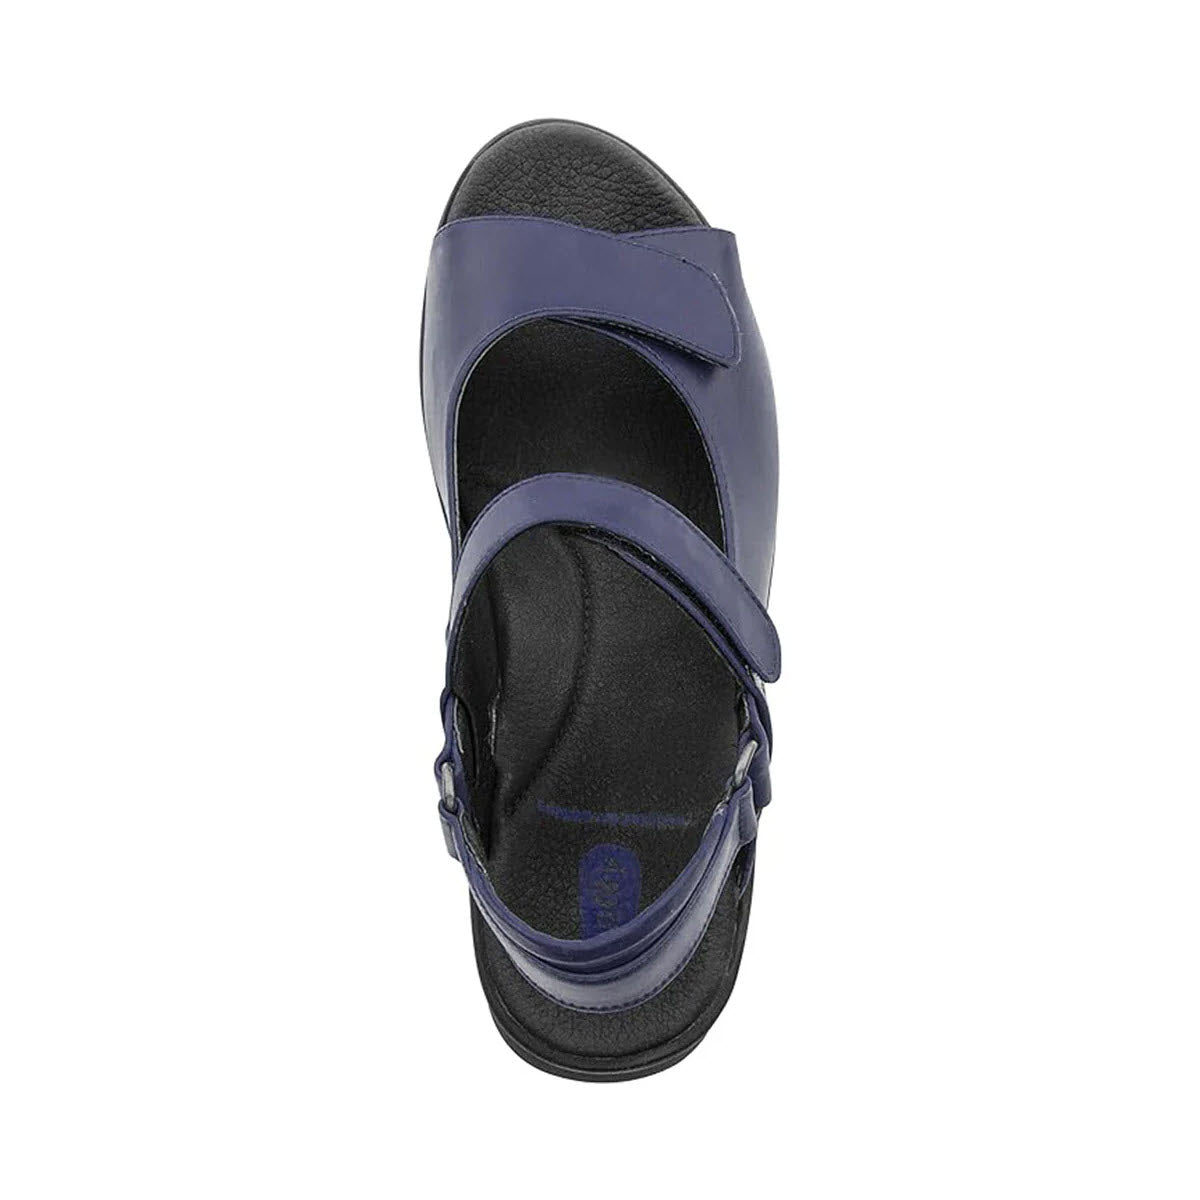 Top view of a single navy blue Wolky Pichu Purple sandal with adjustable straps and a black insole featuring awe-inspiring grip on a white background.